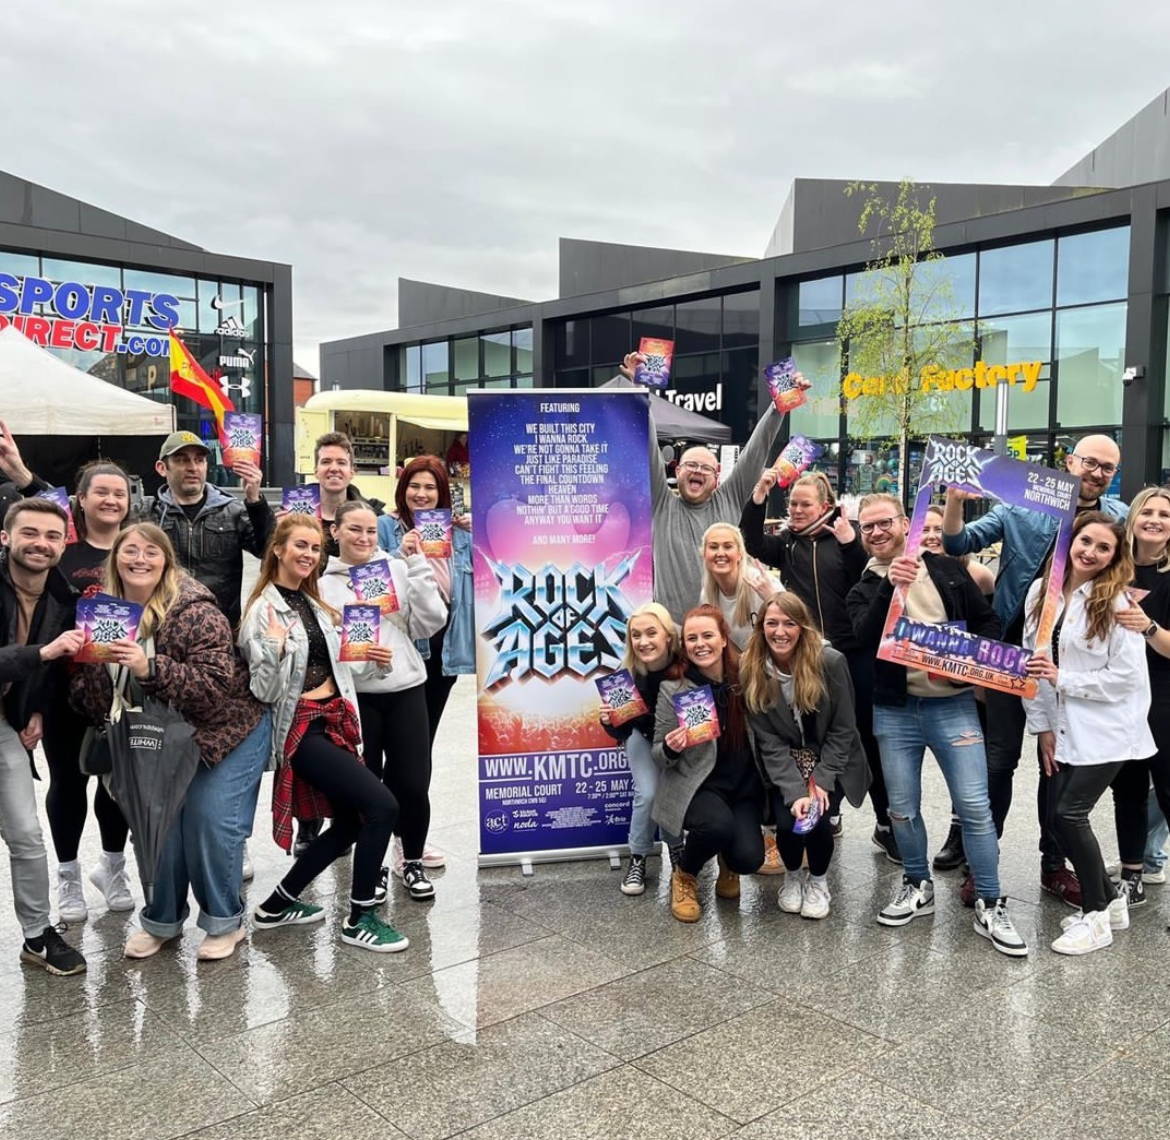 Have you got your tickets for ROCK OF AGES yet? ⚡️ The talented KMTC Theatre hit the stage at Memorial Court, Northwich 22nd-25th May🕺🎉 Don't forget to grab tickets 👉 loom.ly/2kqw2aw